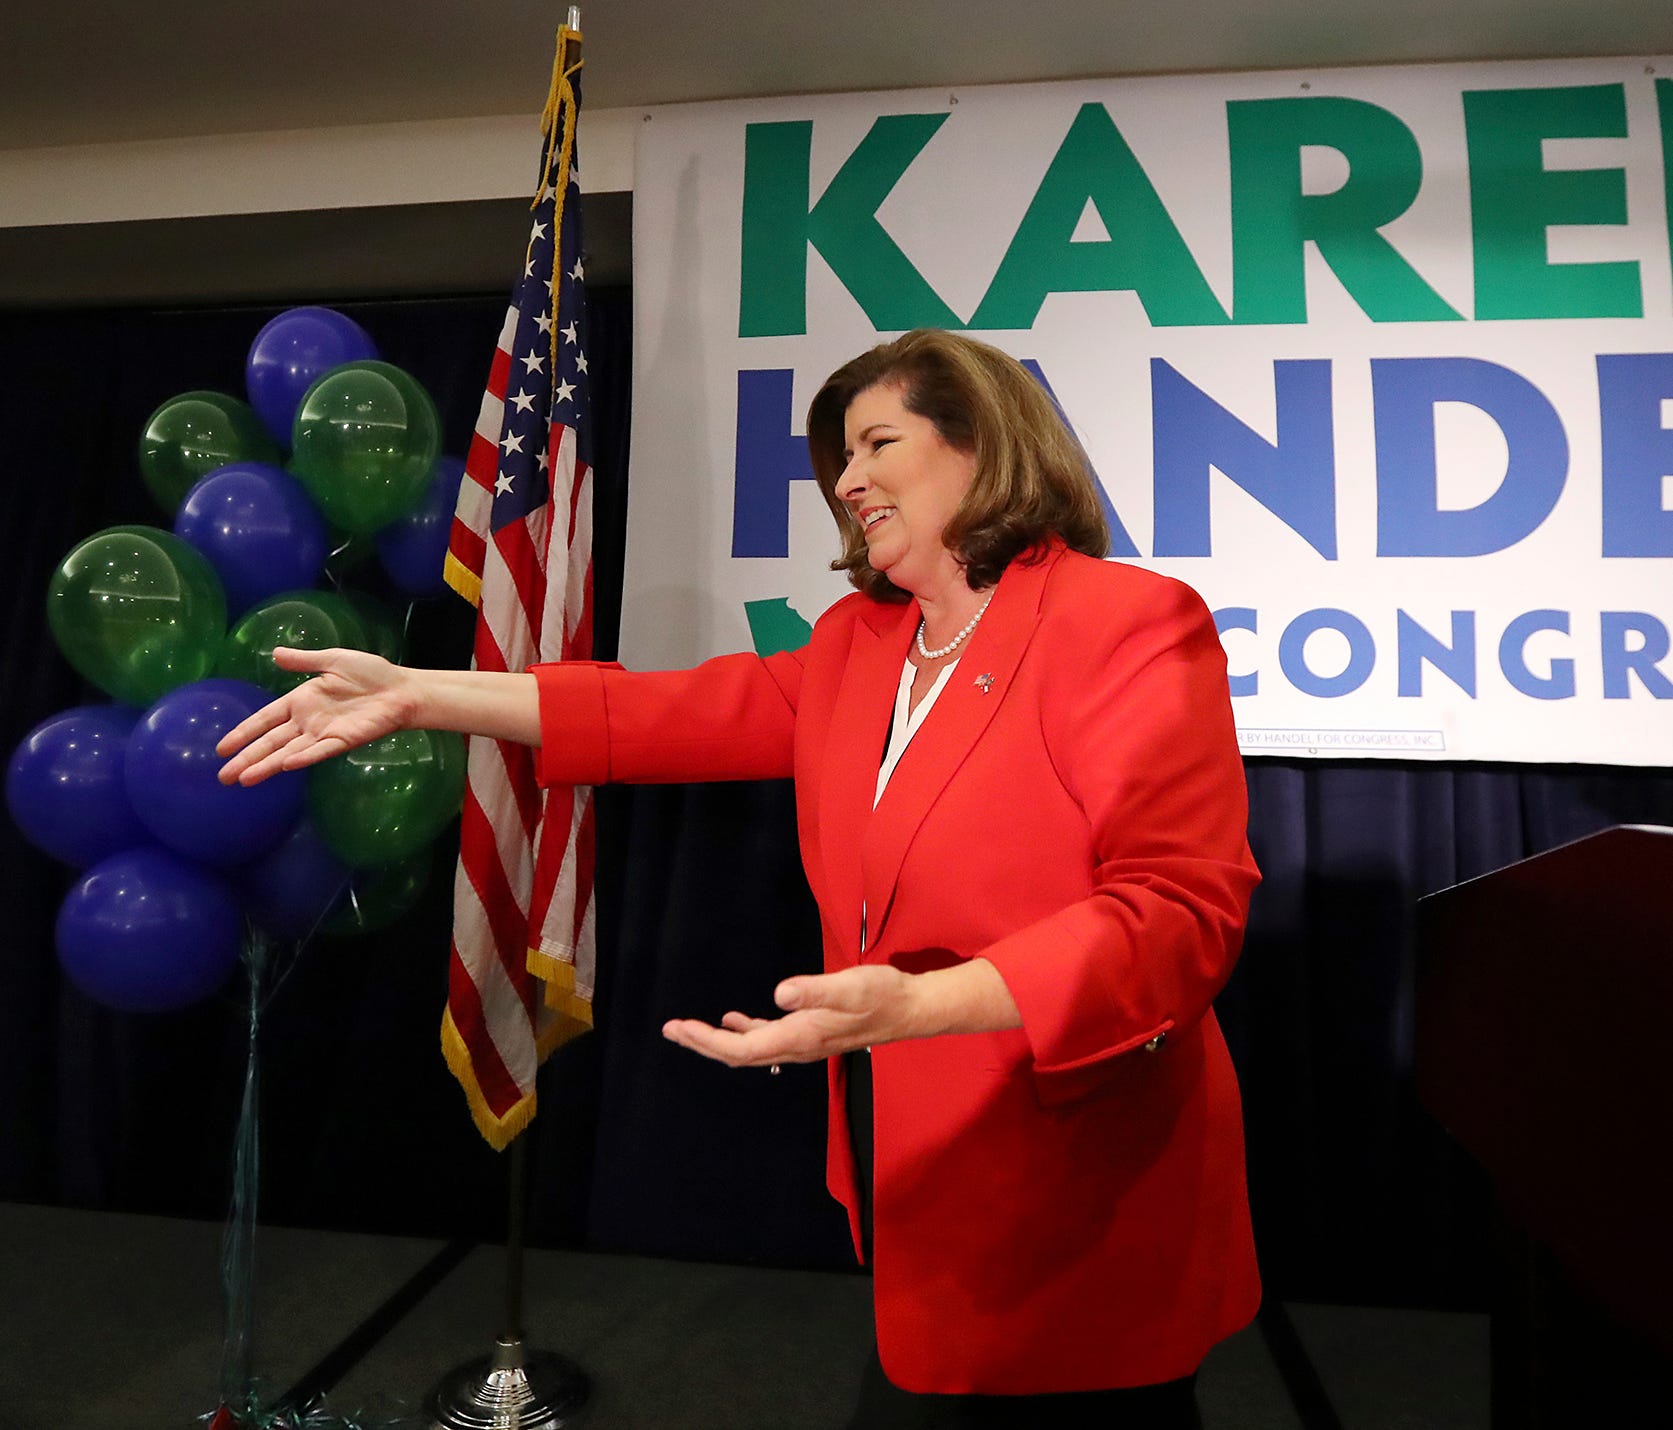 Karen Handel makes an early appearance to thank her supporters after the first returns come in during her election night party in the 6th District race with Jon Ossoff on June 20, 2017, in Atlanta.